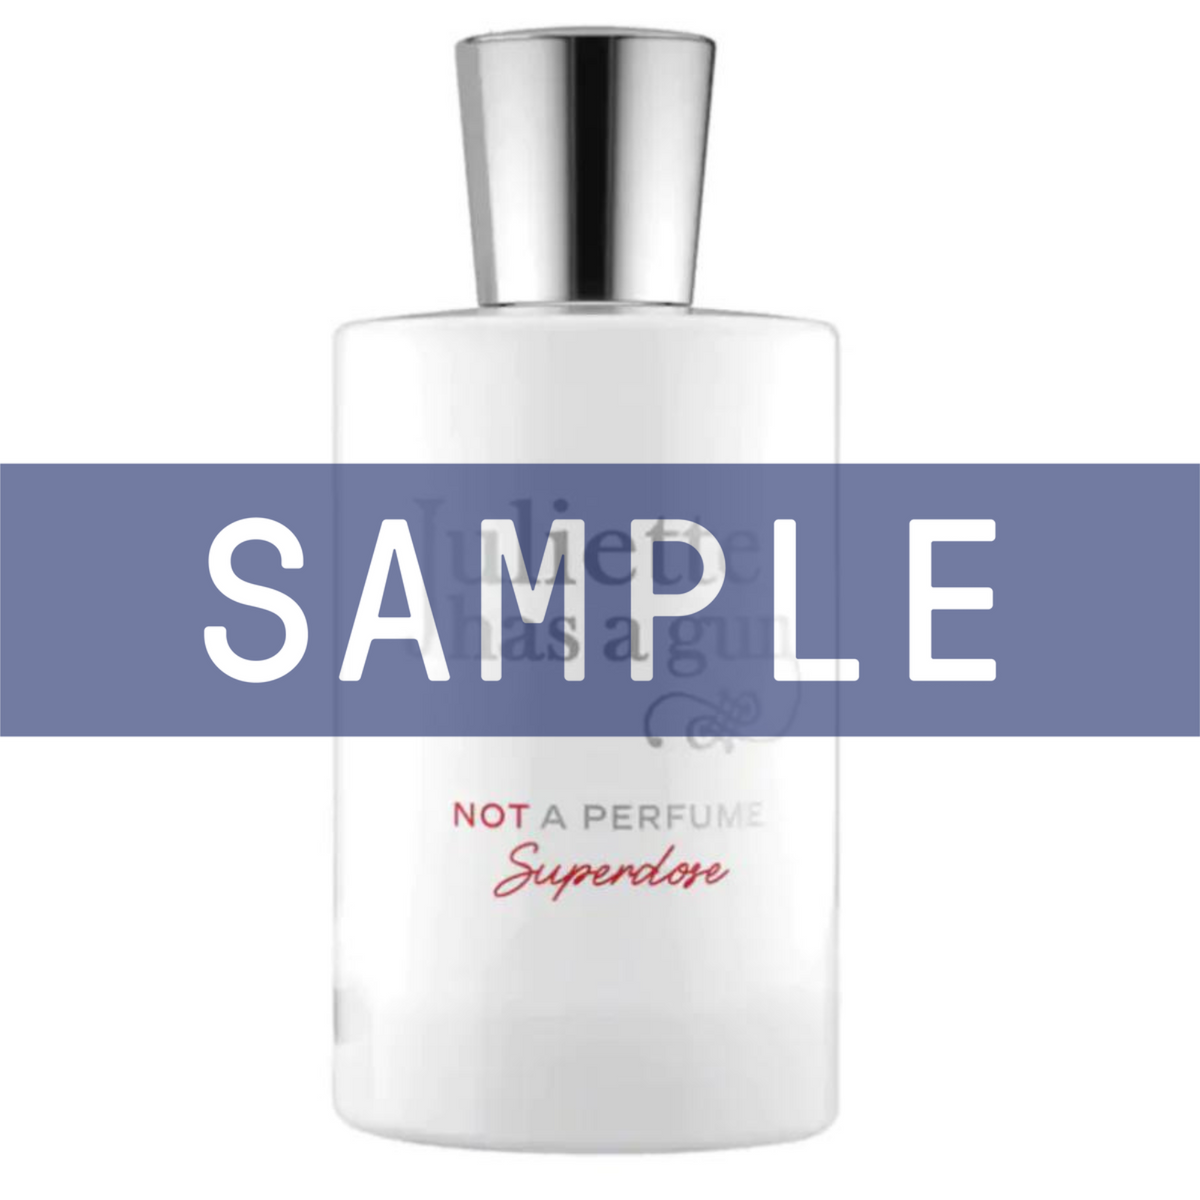 Primary Image of Sample - Not a Perfumer Superdose